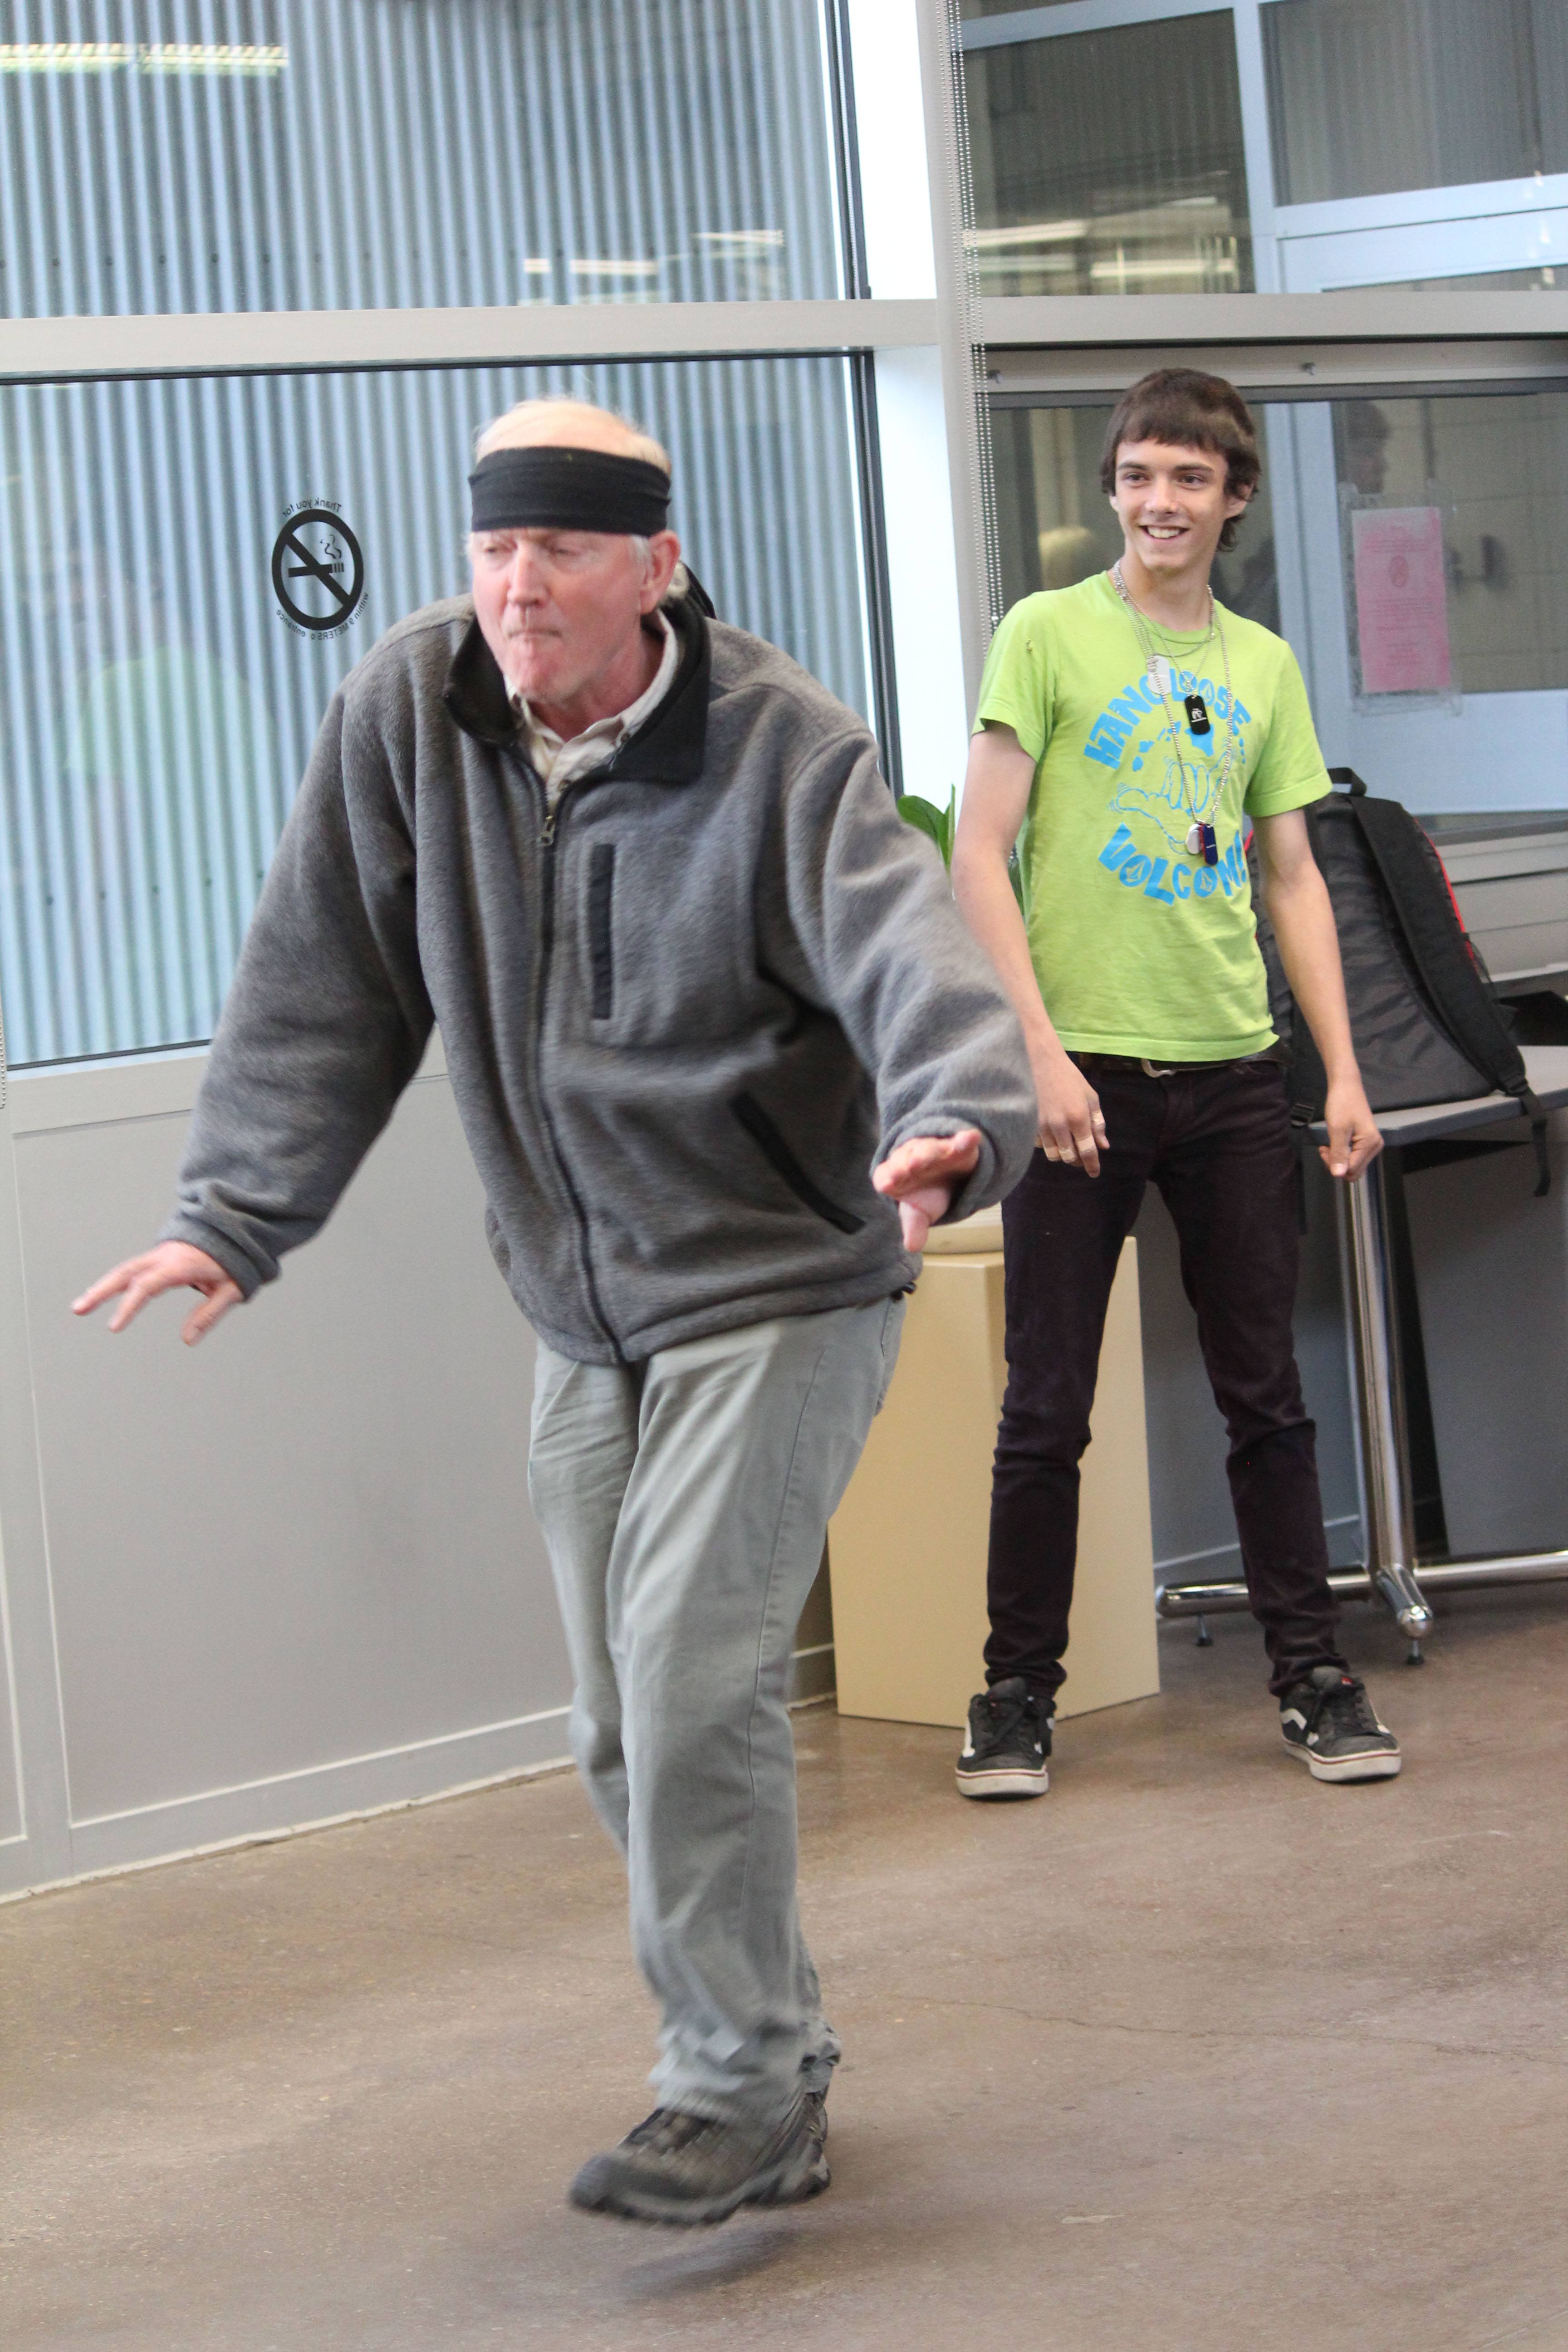 SWAGGER- Bill McLean shows some skills in a dance battle as a part of Red Deer College’s Career Expo on Thursday.